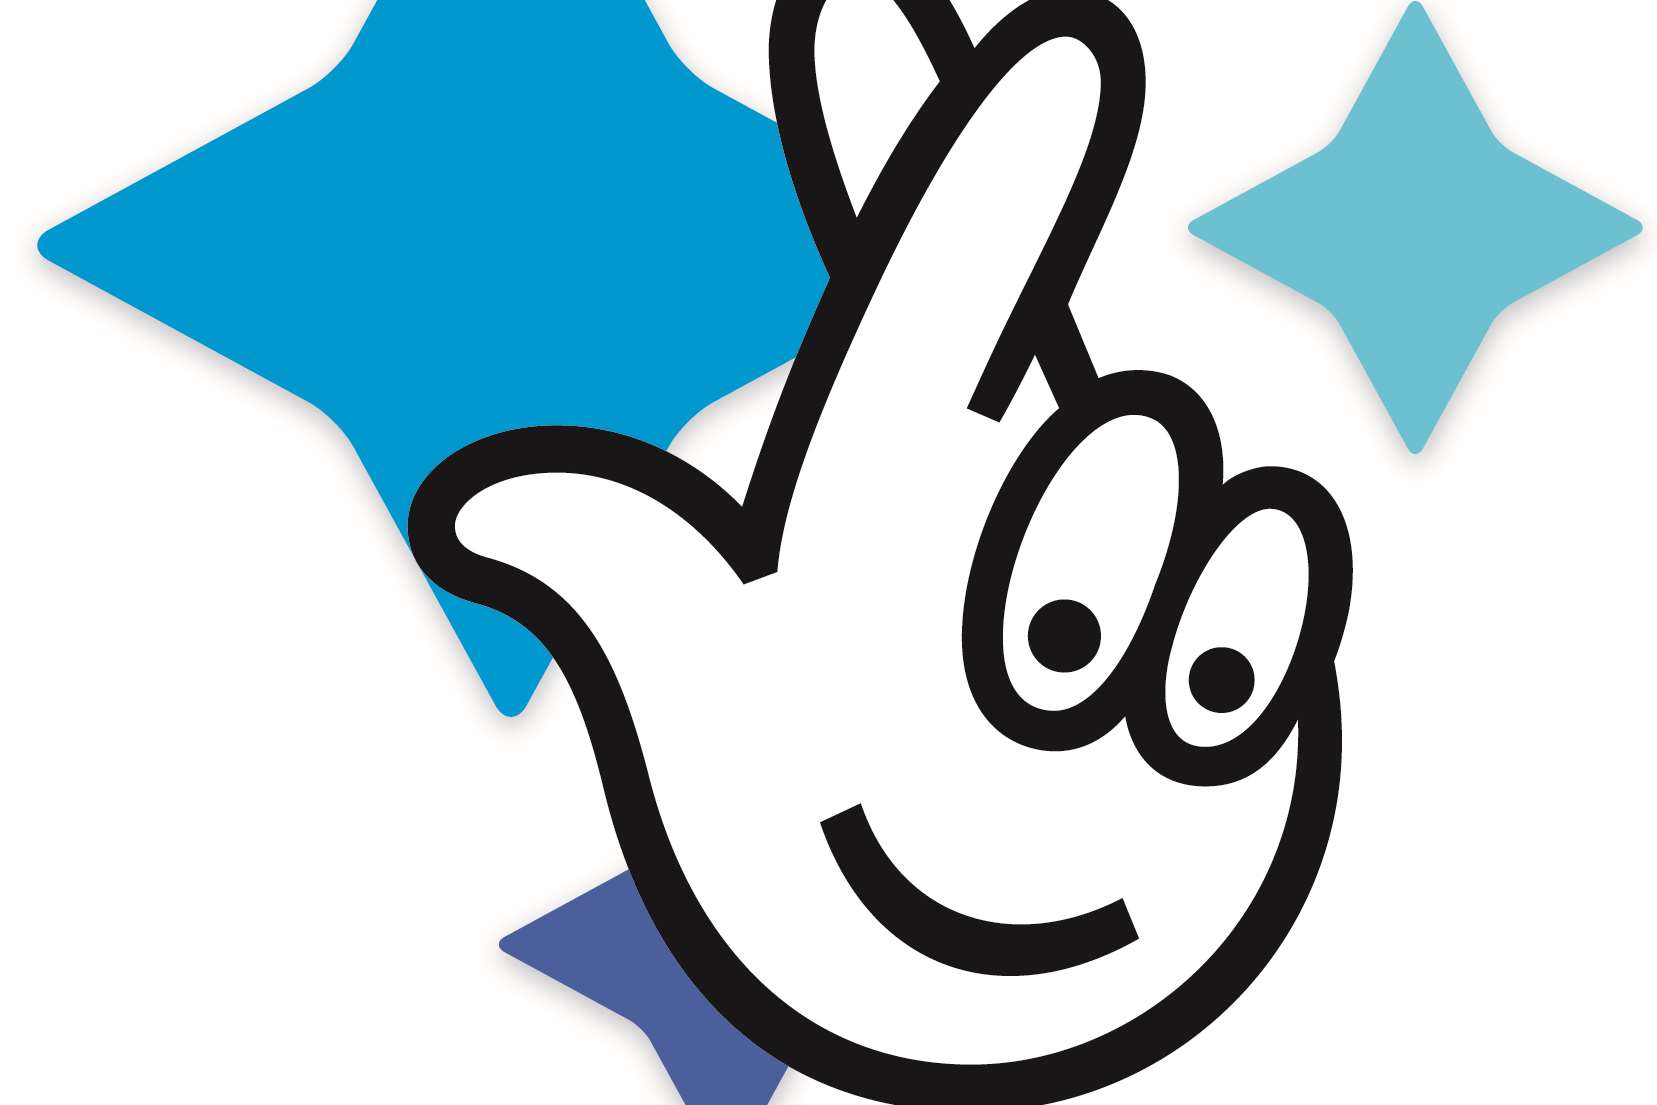 National Lottery logo. Image courtesy of The National Lottery